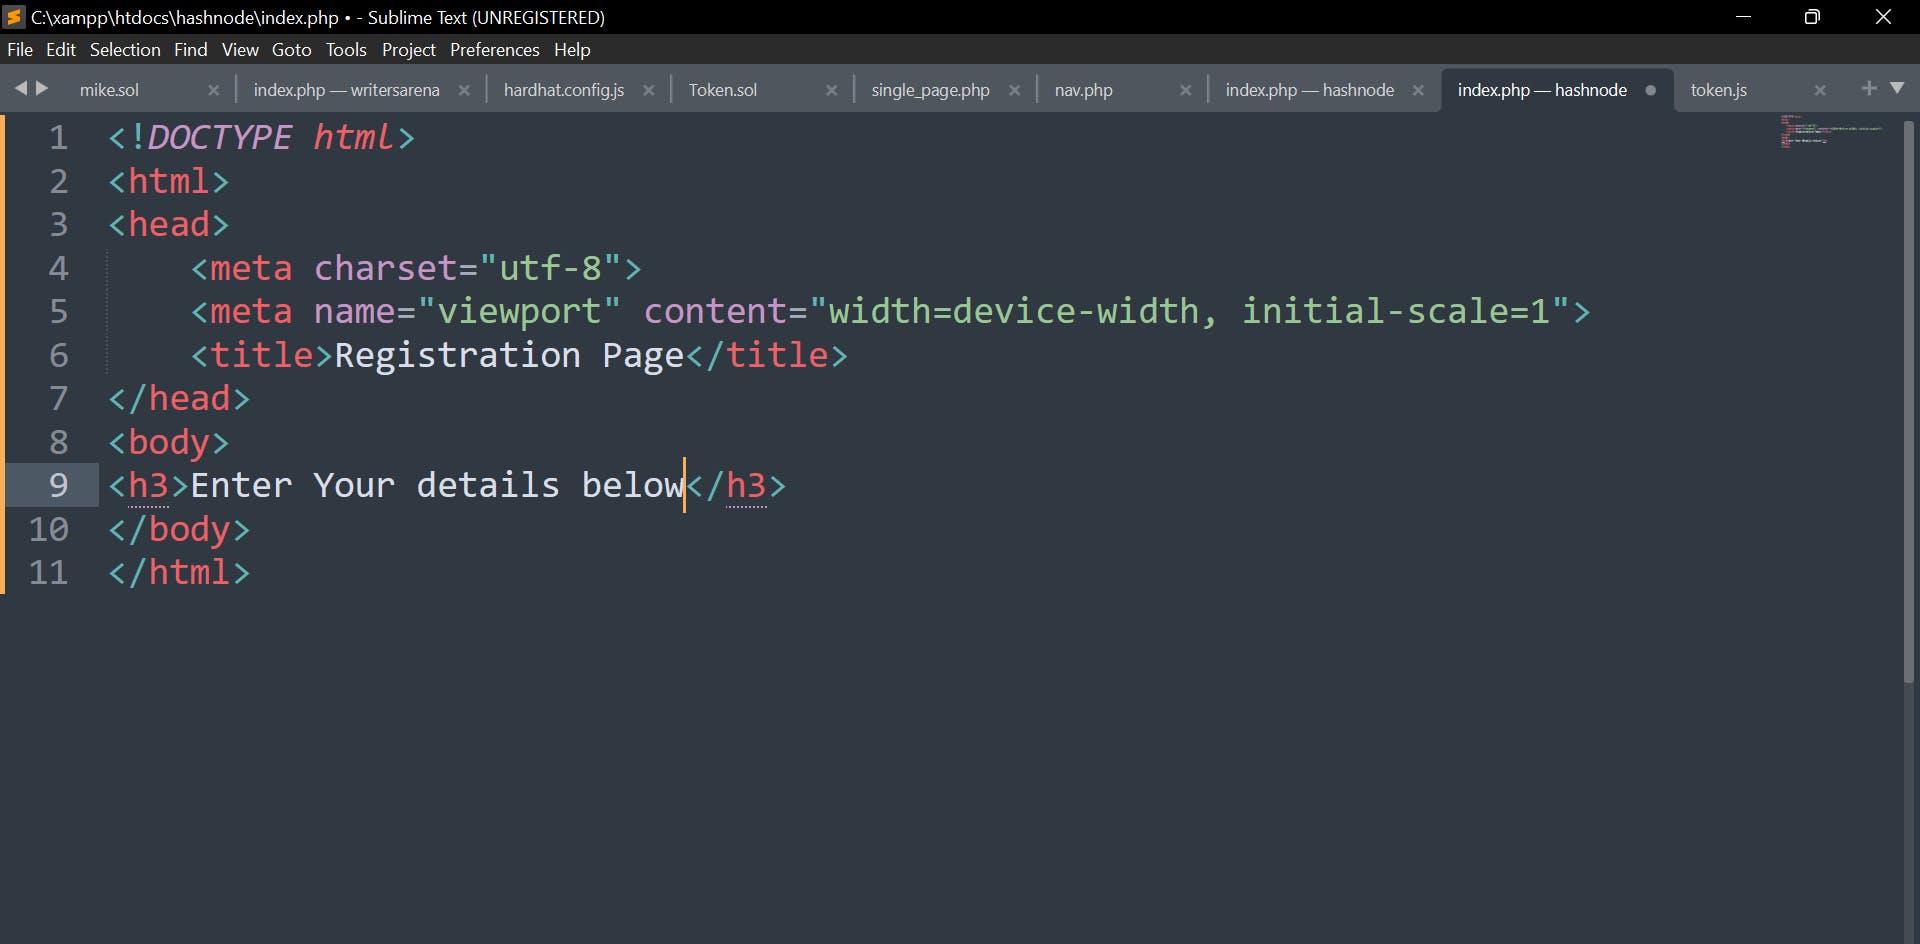 C__xampp_htdocs_hashnode_index.php • - Sublime Text (UNREGISTERED) 30-Sep-22 2_26_42 PM.png